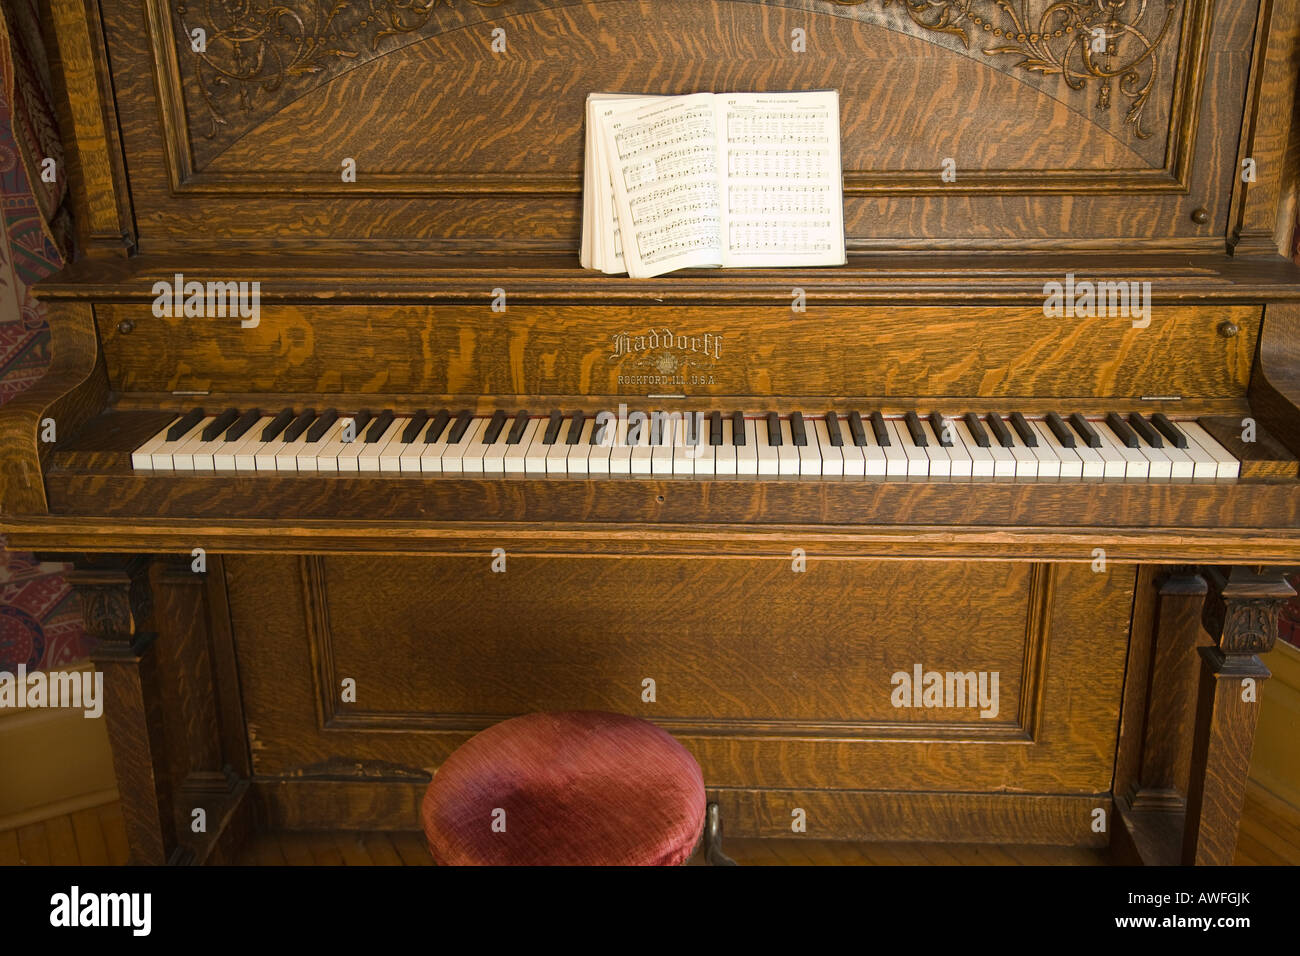 ILLINOIS Rockford Music book on wooden piano keyboard on musical instrument Stock Photo